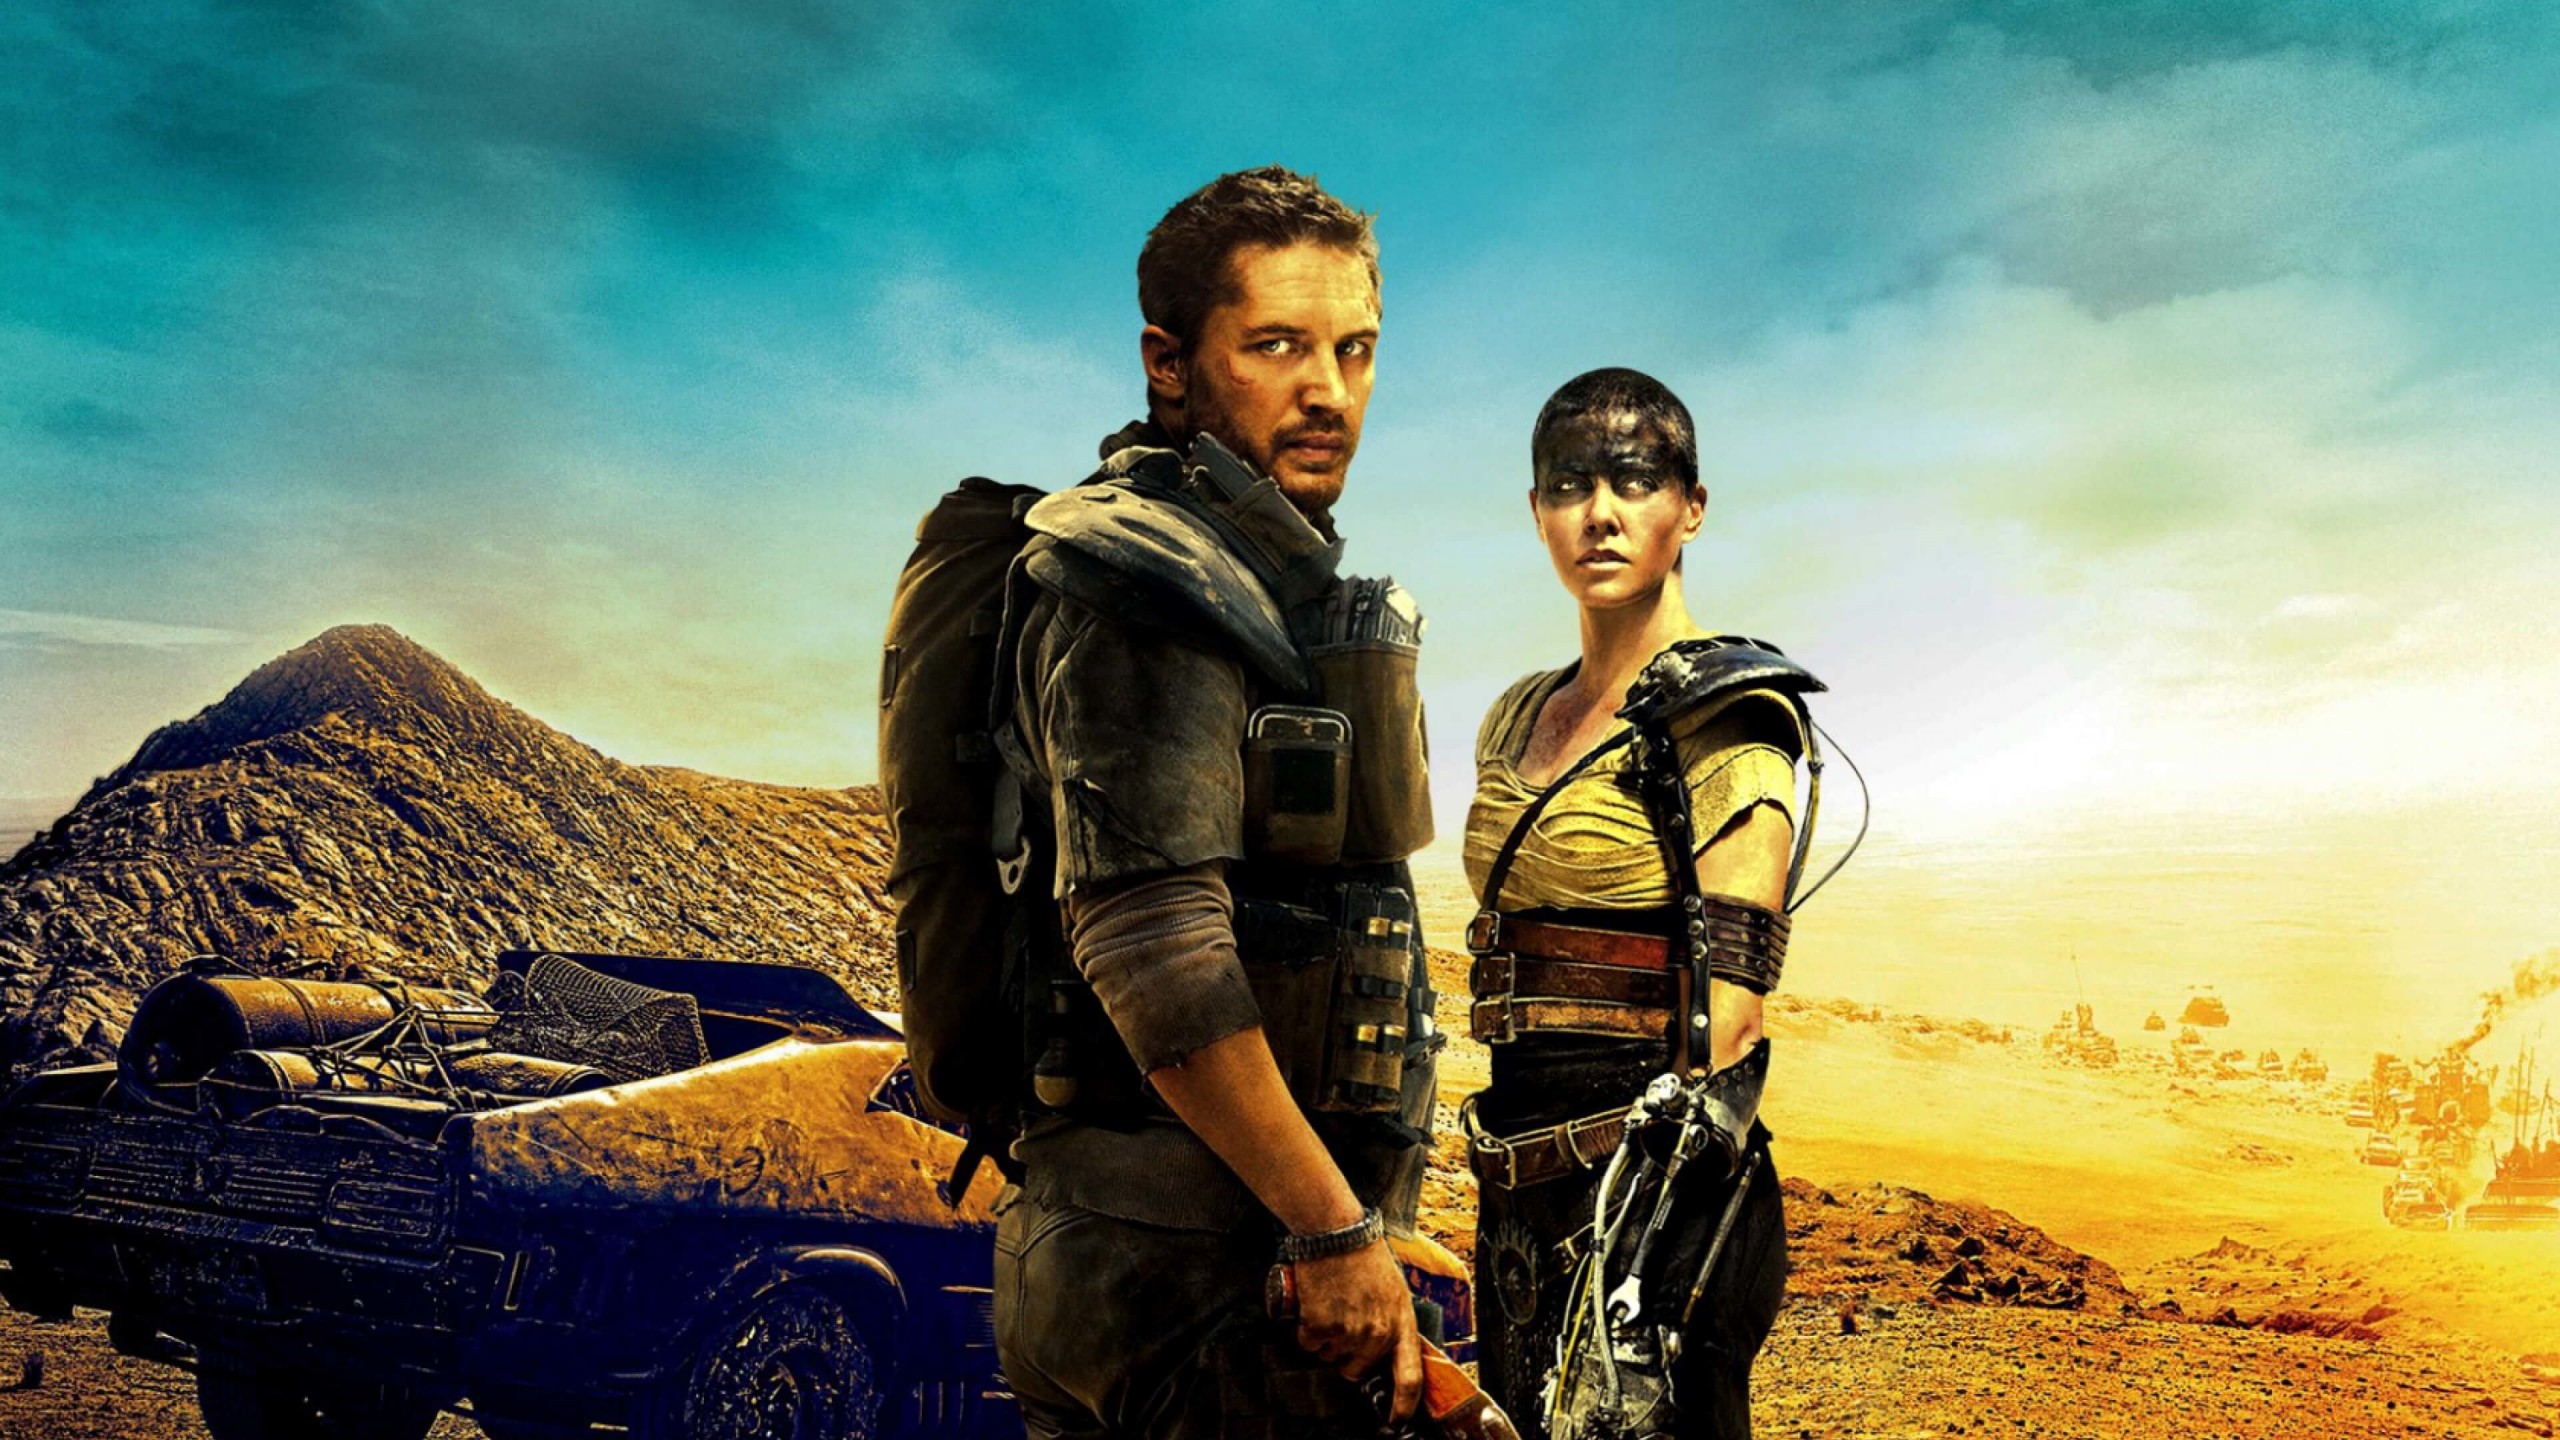 Mad Max: Fury Road Wallpaper for Social Media YouTube Channel Art